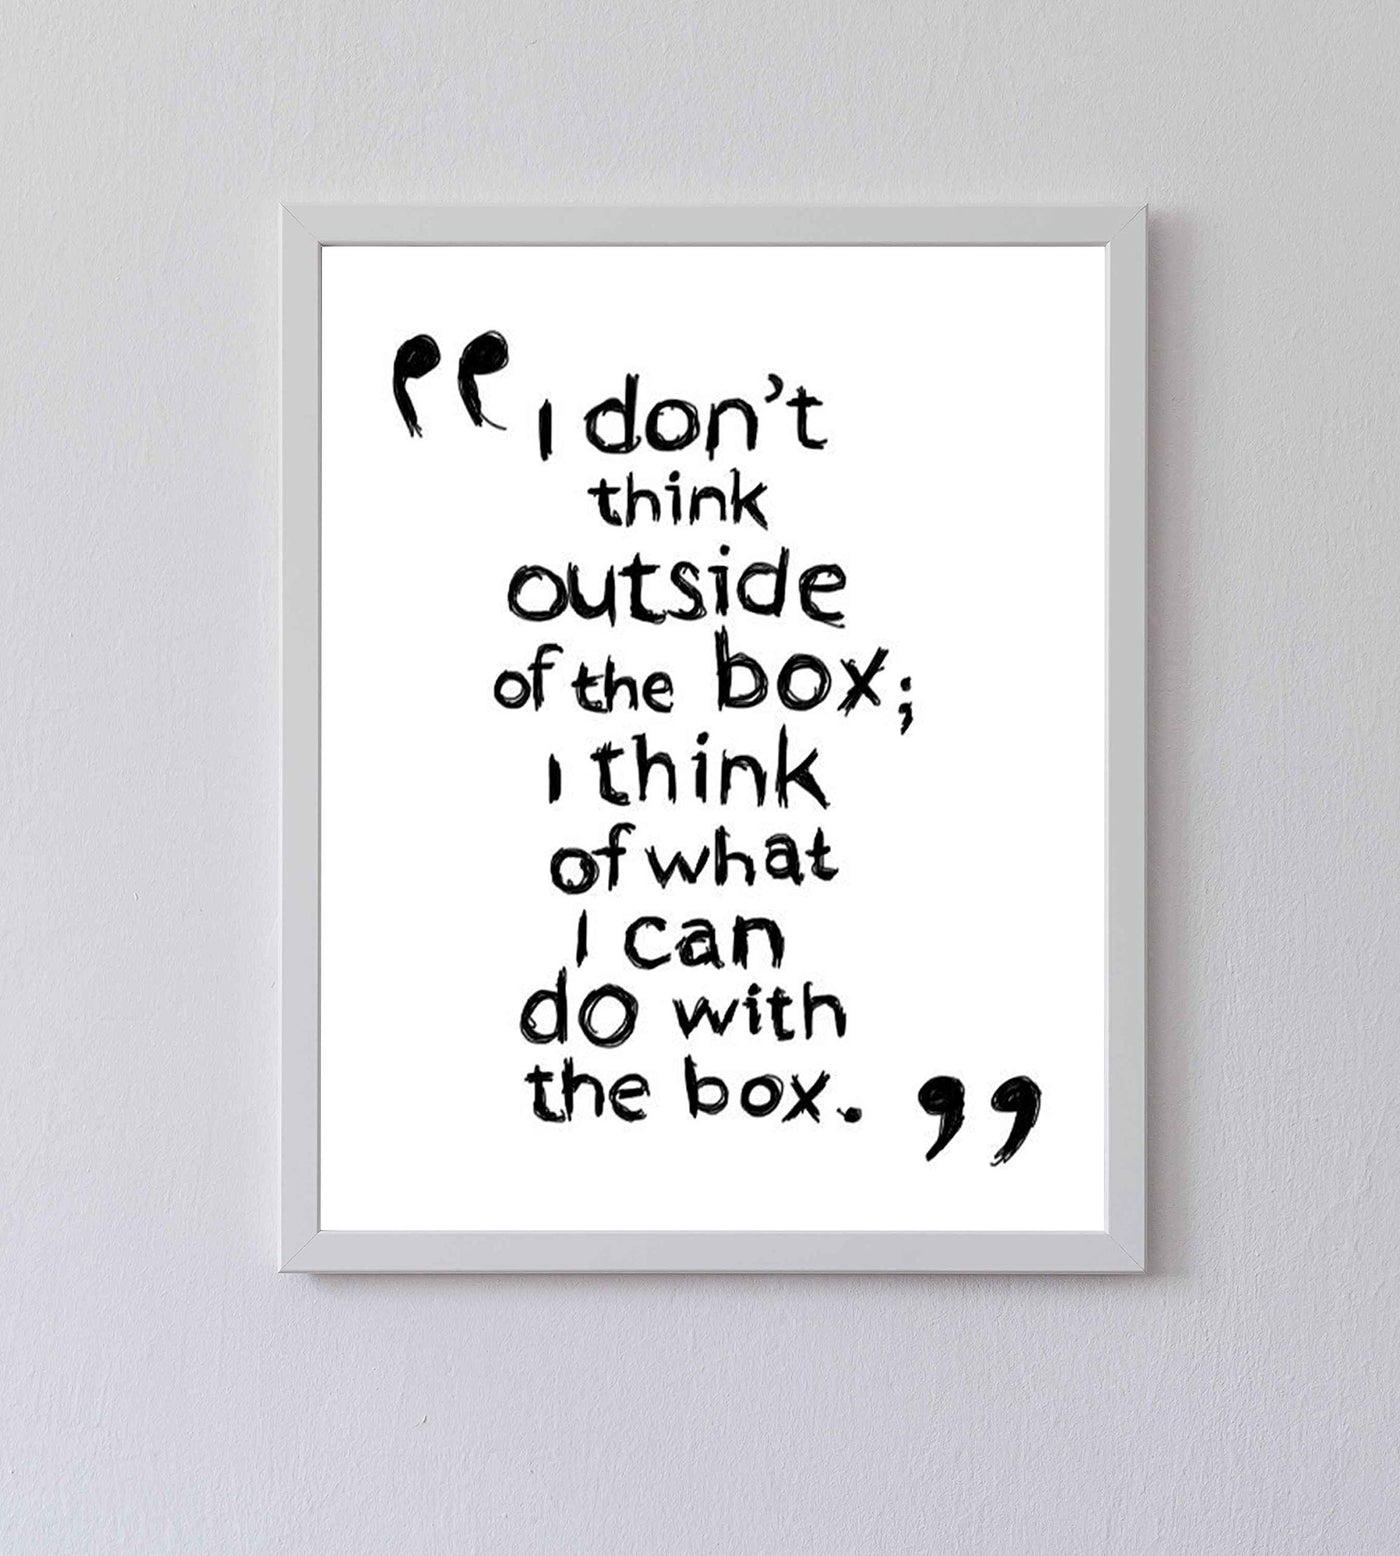 I Don't Think Outside the Box Funny Wall Art Sign -8 x 10" Humorous Typographic Poster Print-Ready to Frame. Ideal Home-Office-Bar-Shop-Cave Decor. Perfect Desk-Cubicle Sign. Fun Novelty Gift!